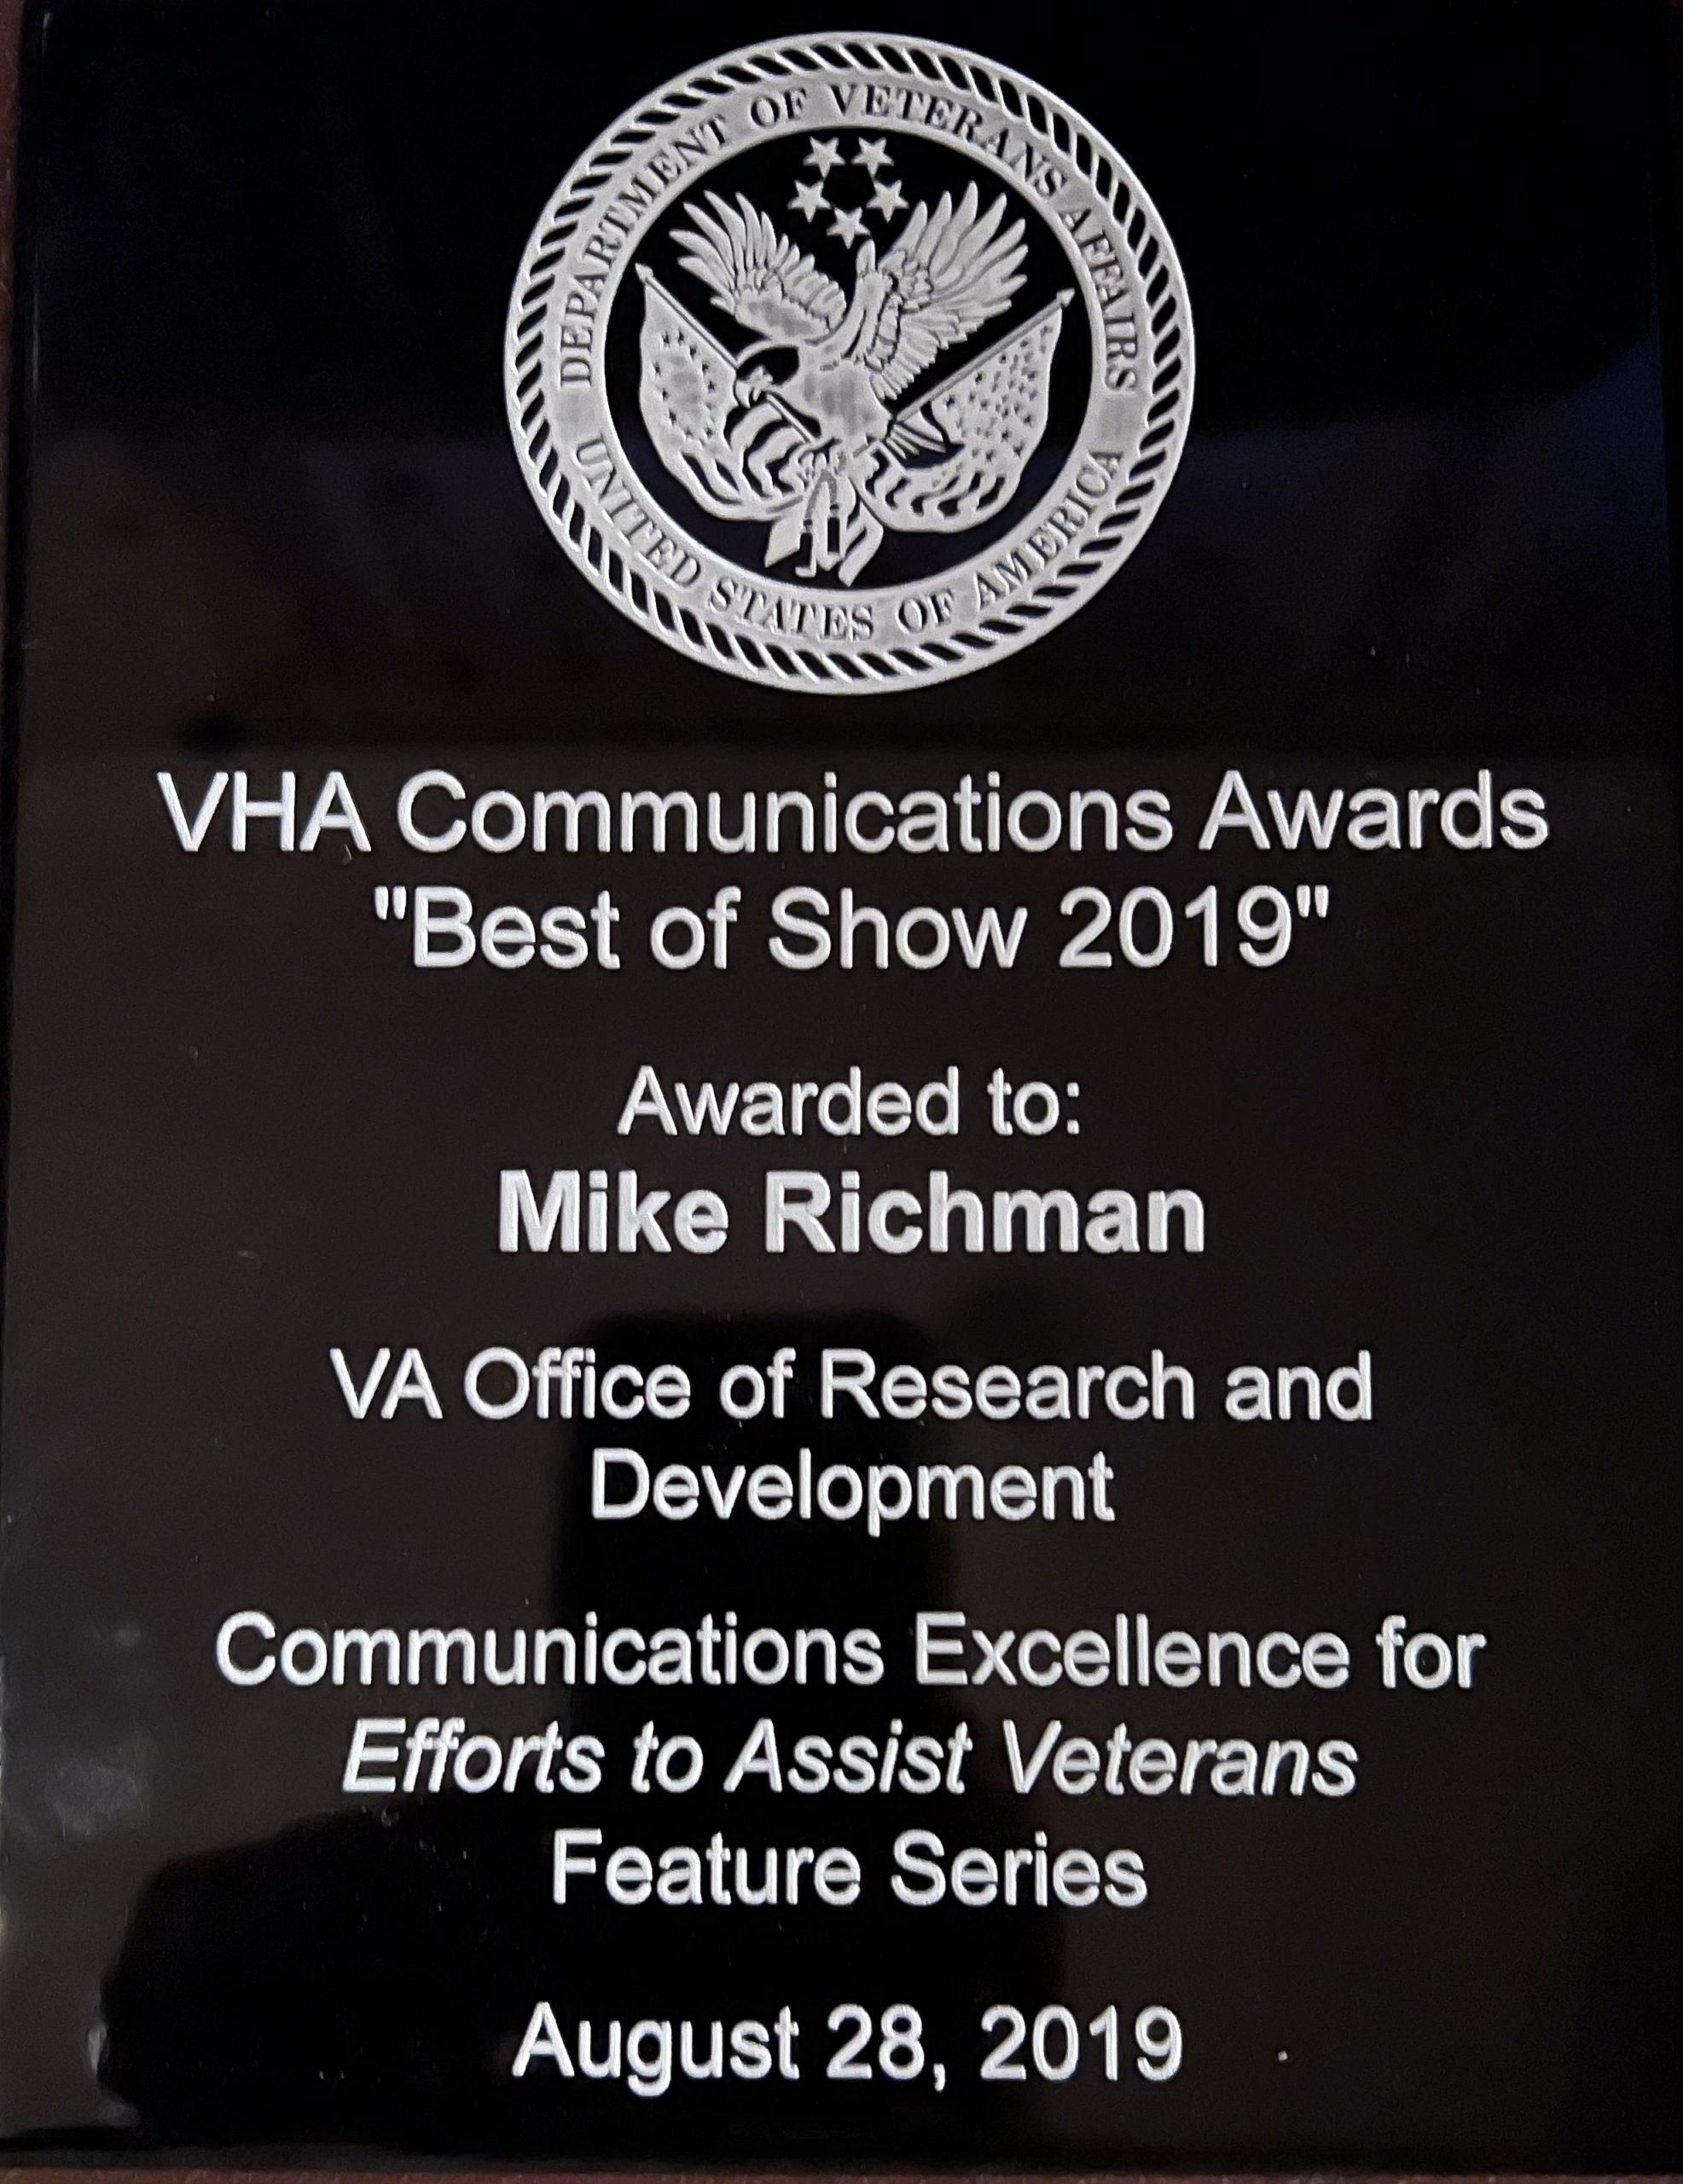 Mike Richman of VA's Office of Research and Development won "Best of Show 2019" for Communications Excellent for "Efforts to Assist Veterans" Feature Series.